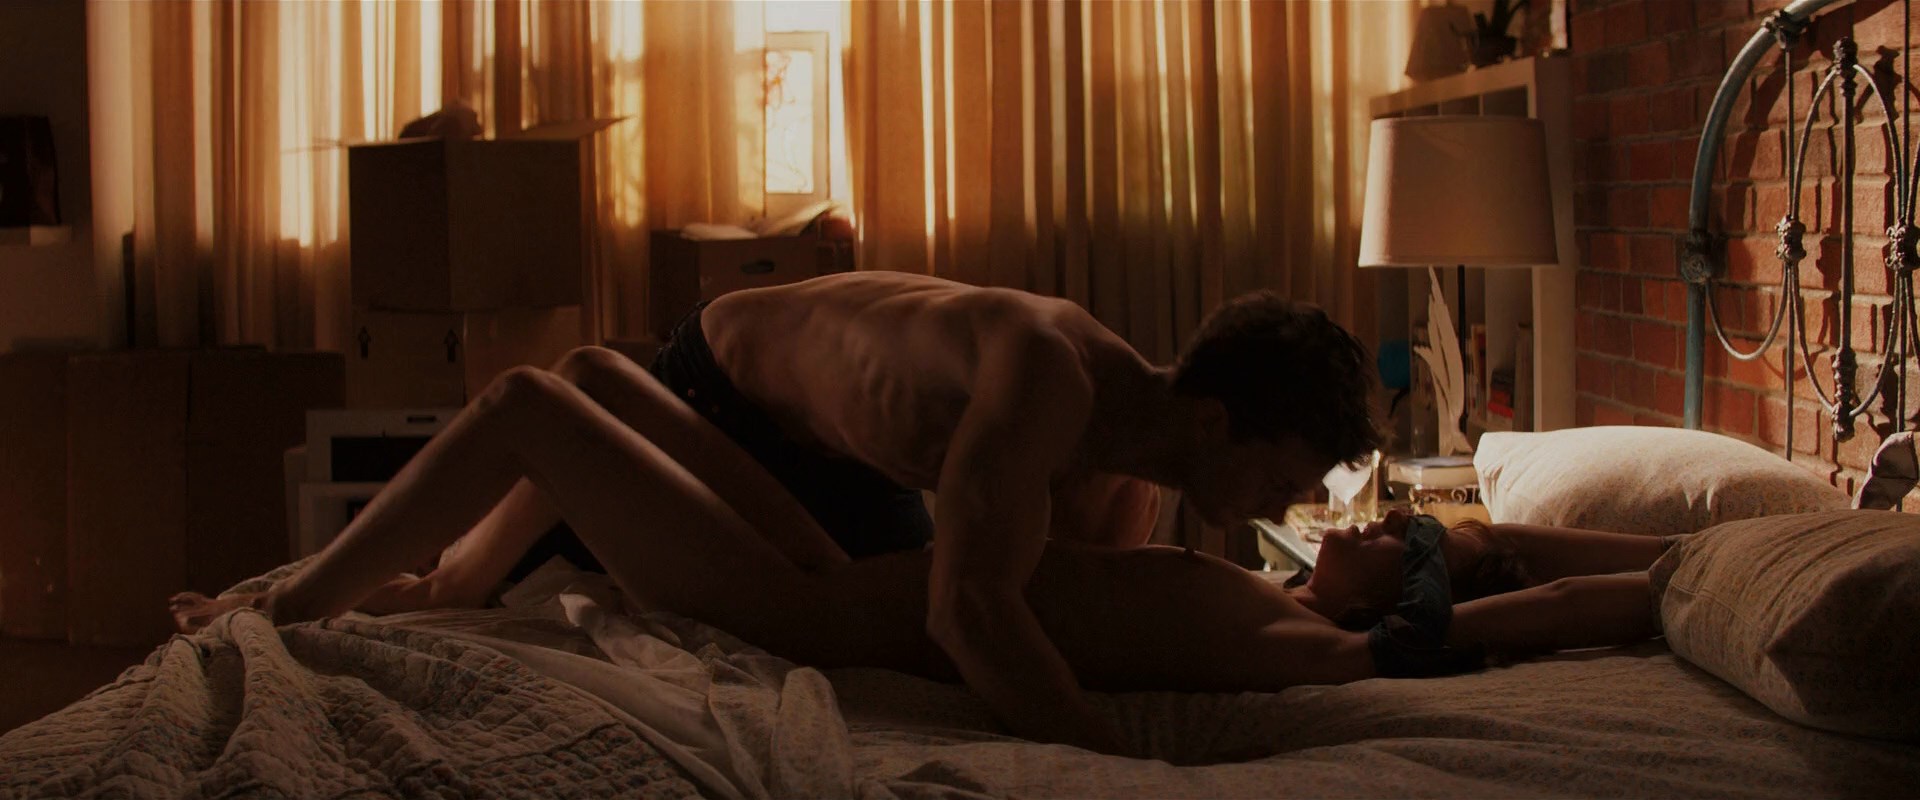 Gifs fifty shades of grey nackt